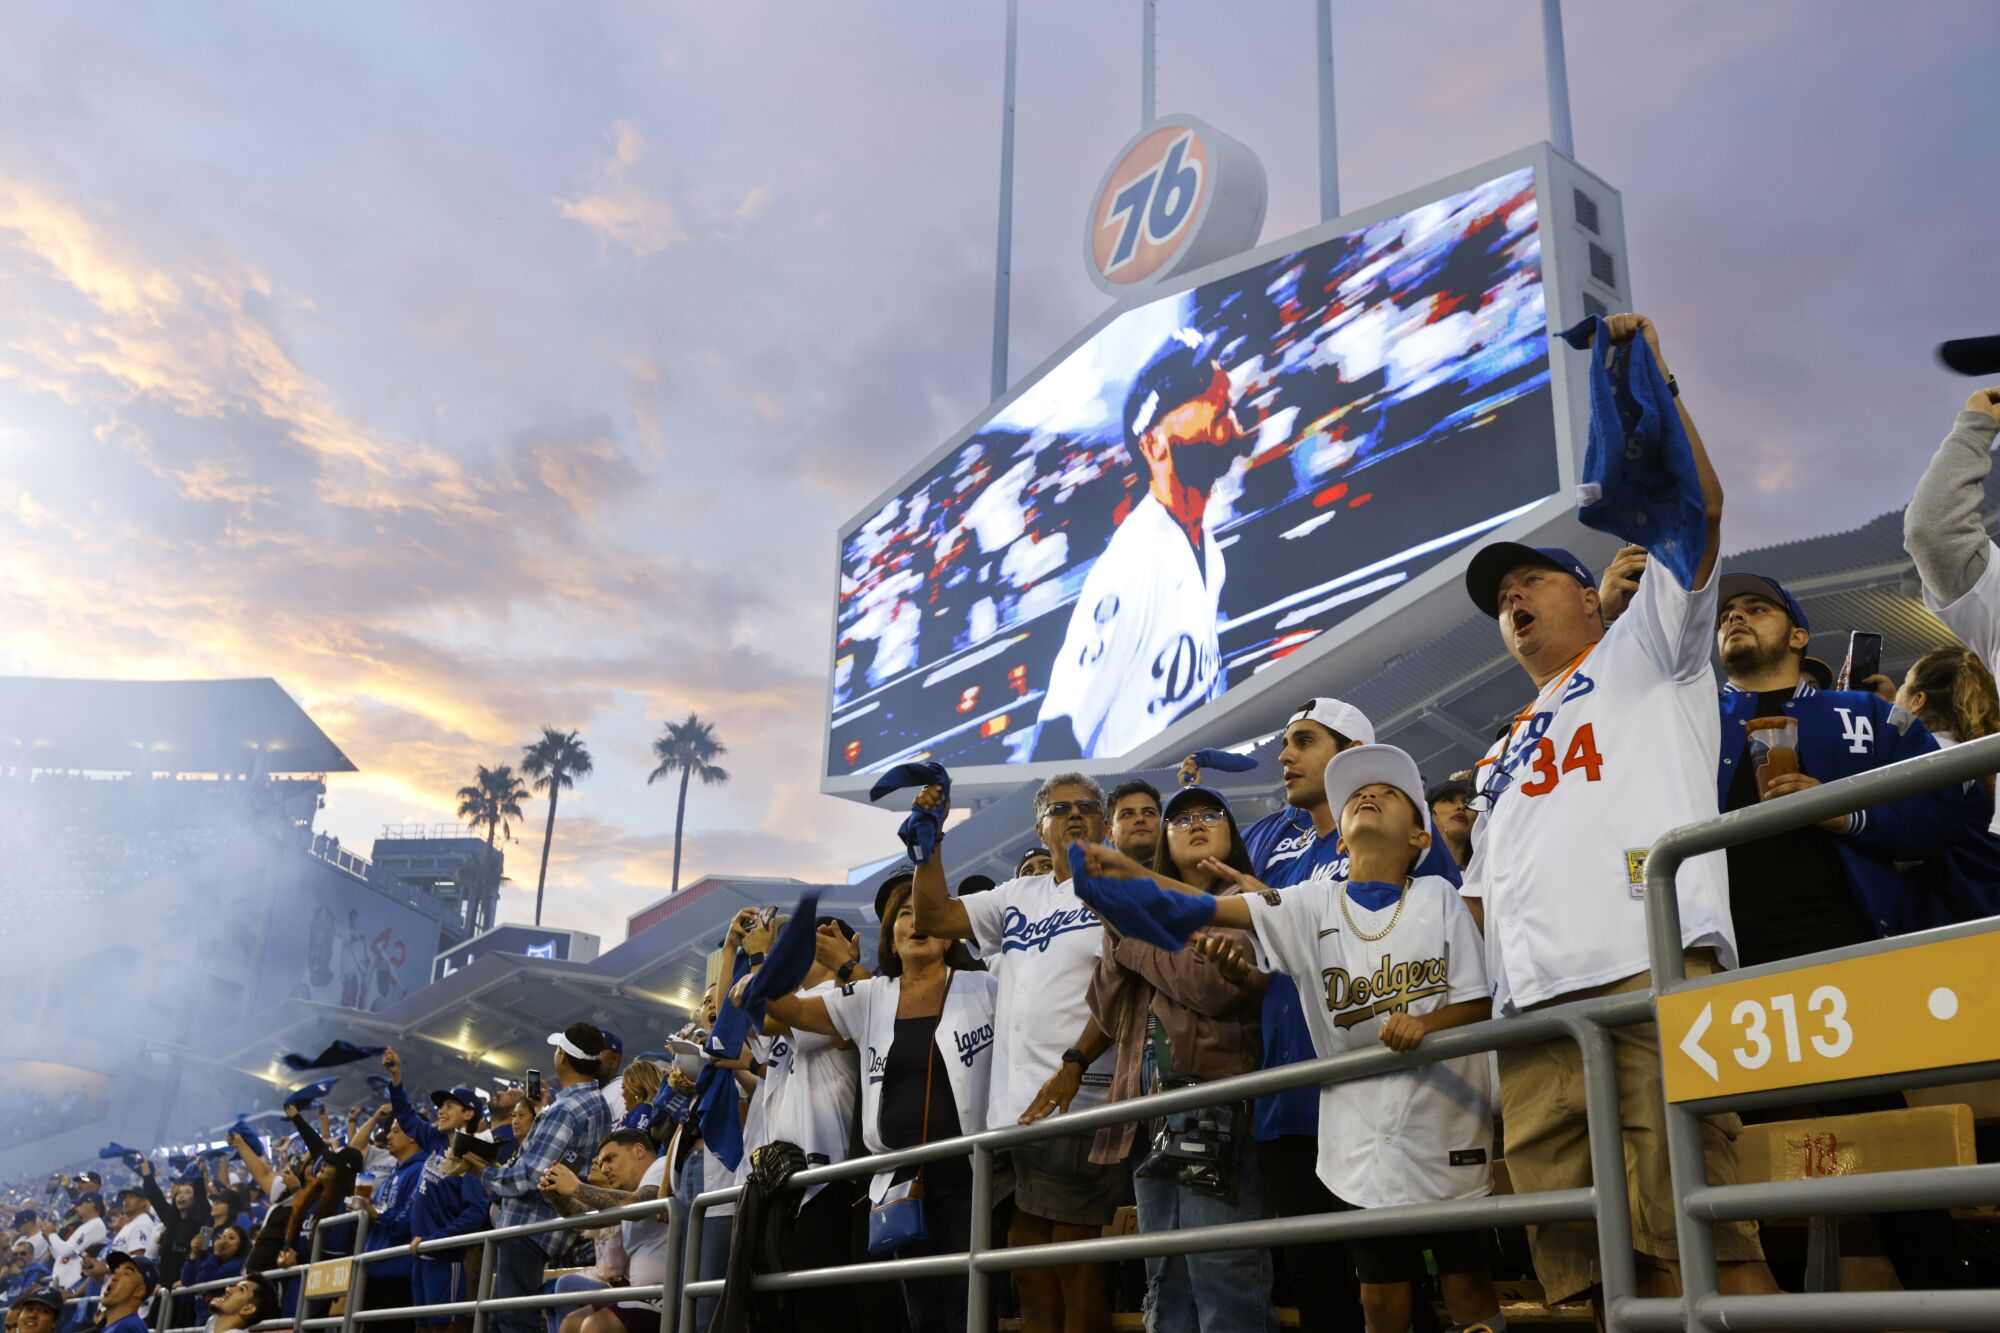  The fans cheer from the outfield as Dodgers Cody Bellinger is introduced.